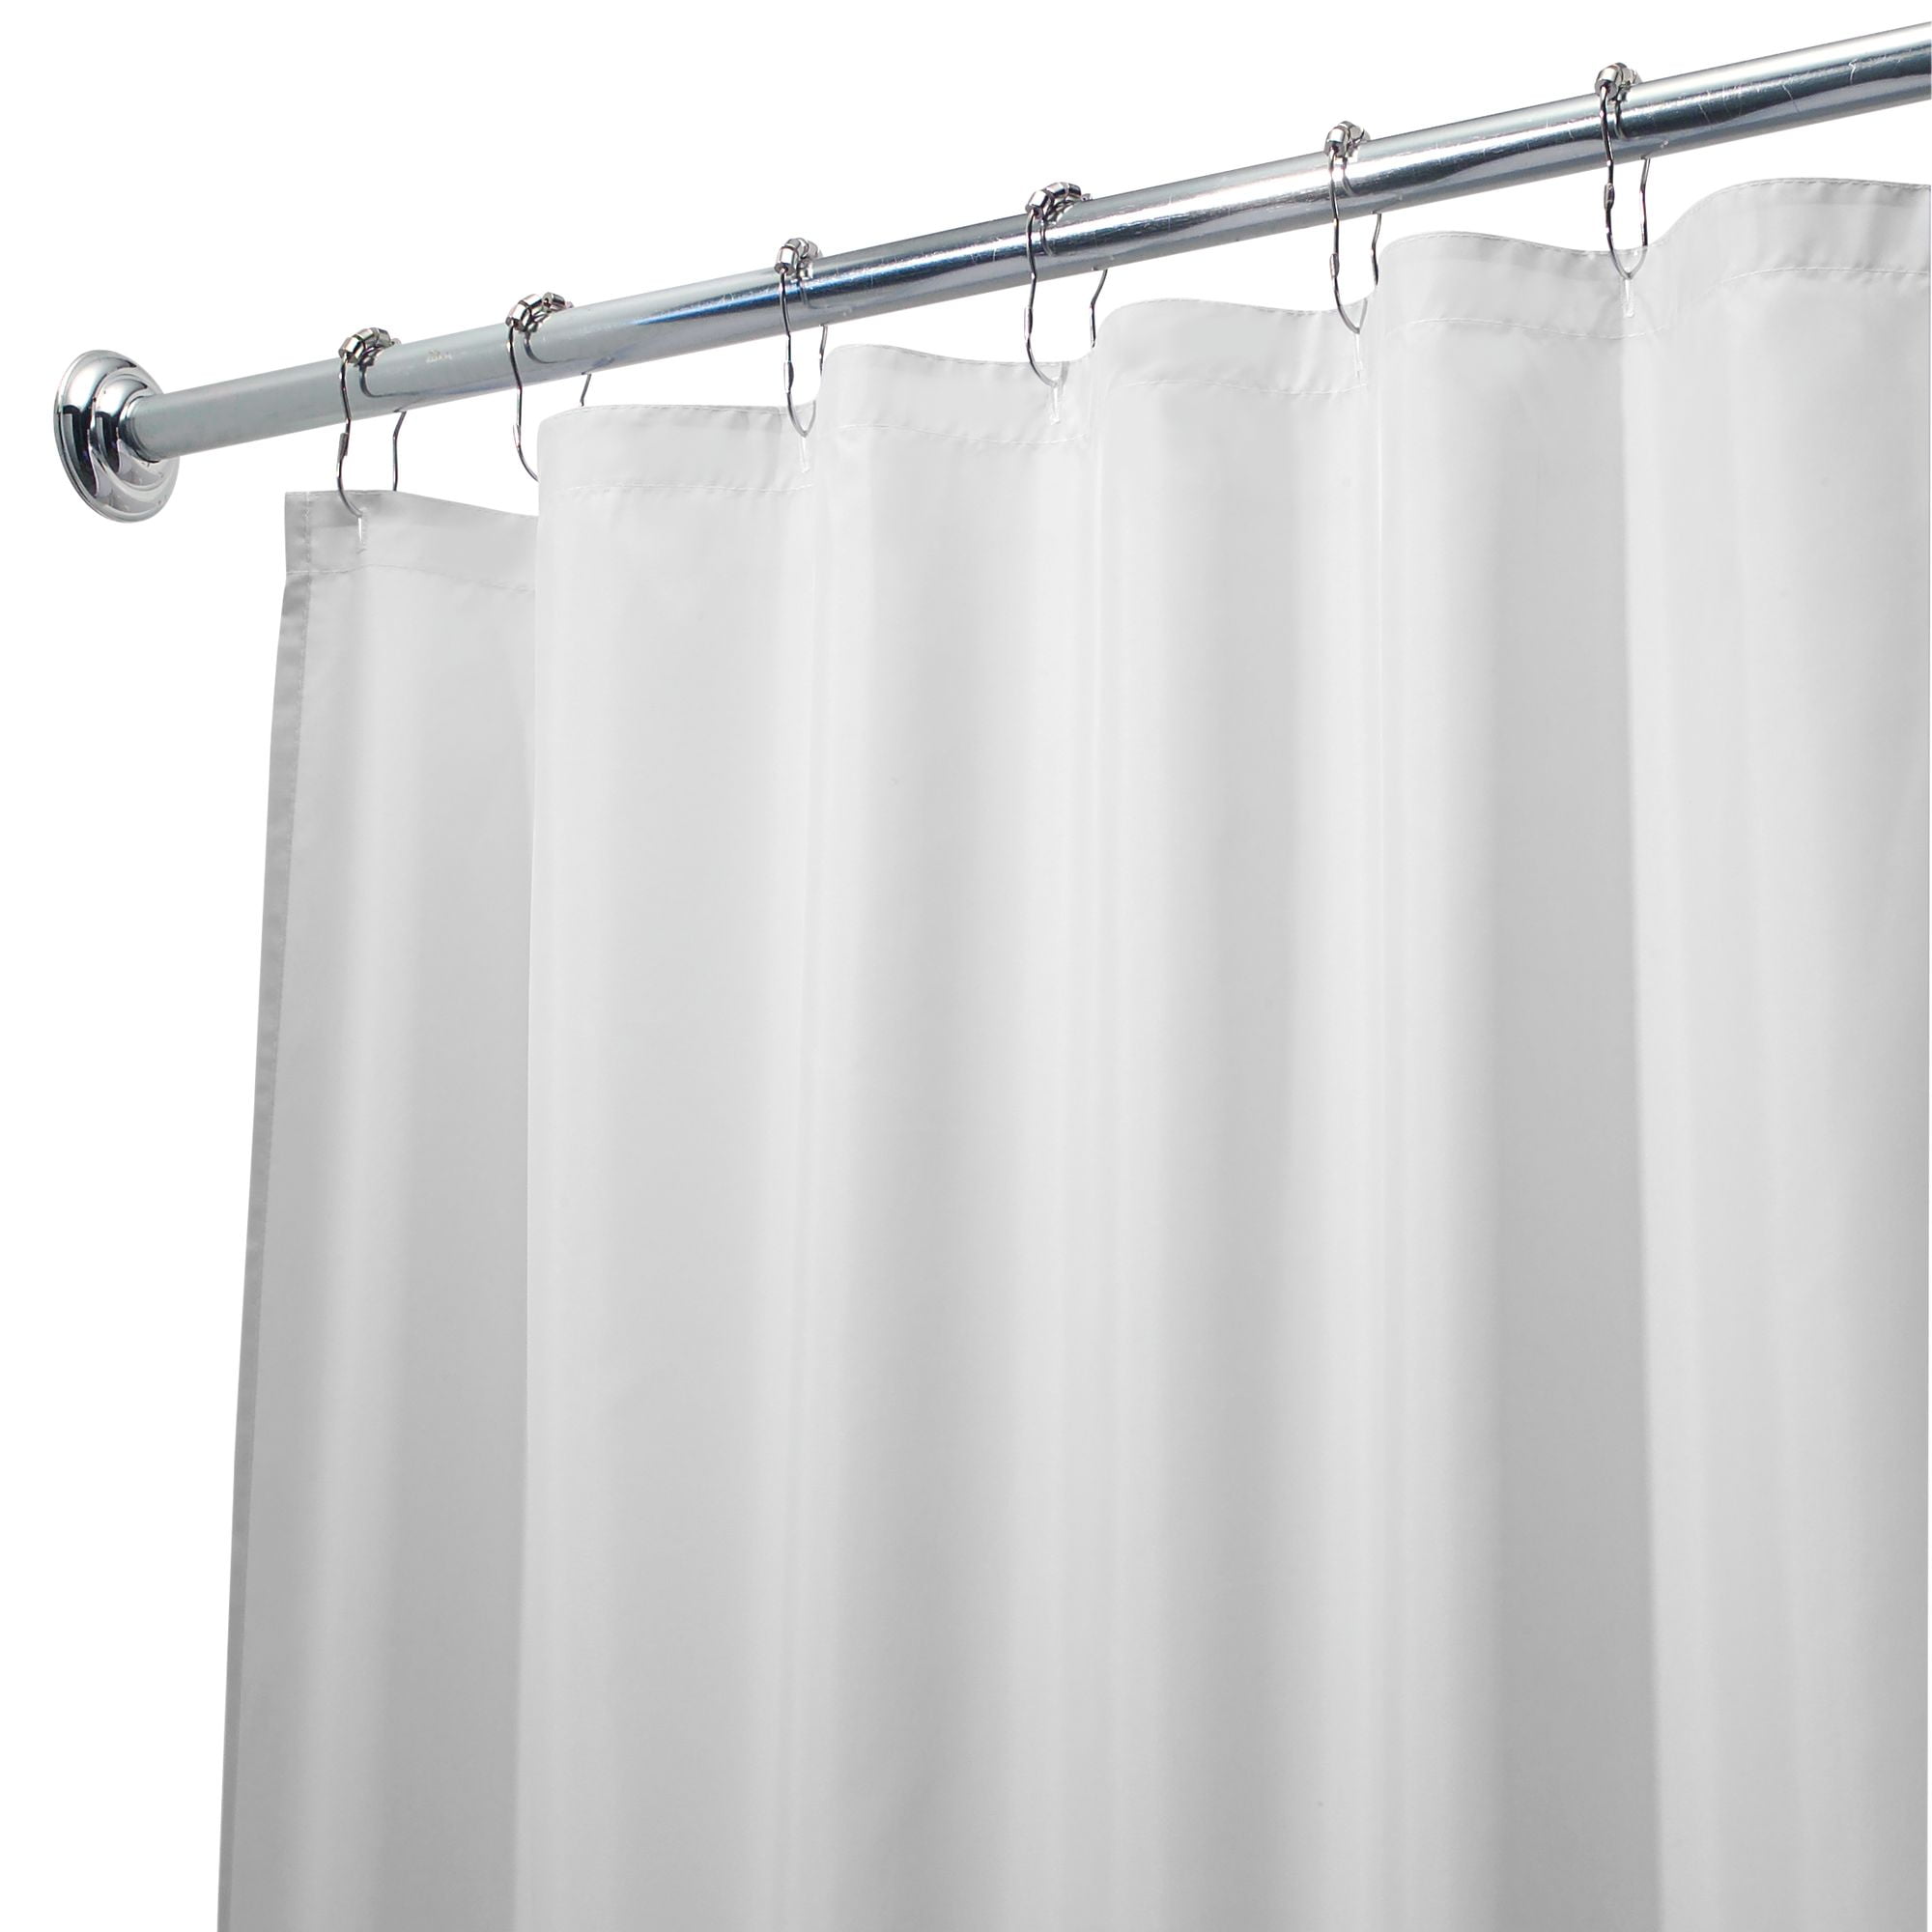 Waterproof Fabric Shower Curtain or Liner 72" W x 76" H  72"W x 76"H Pure White 